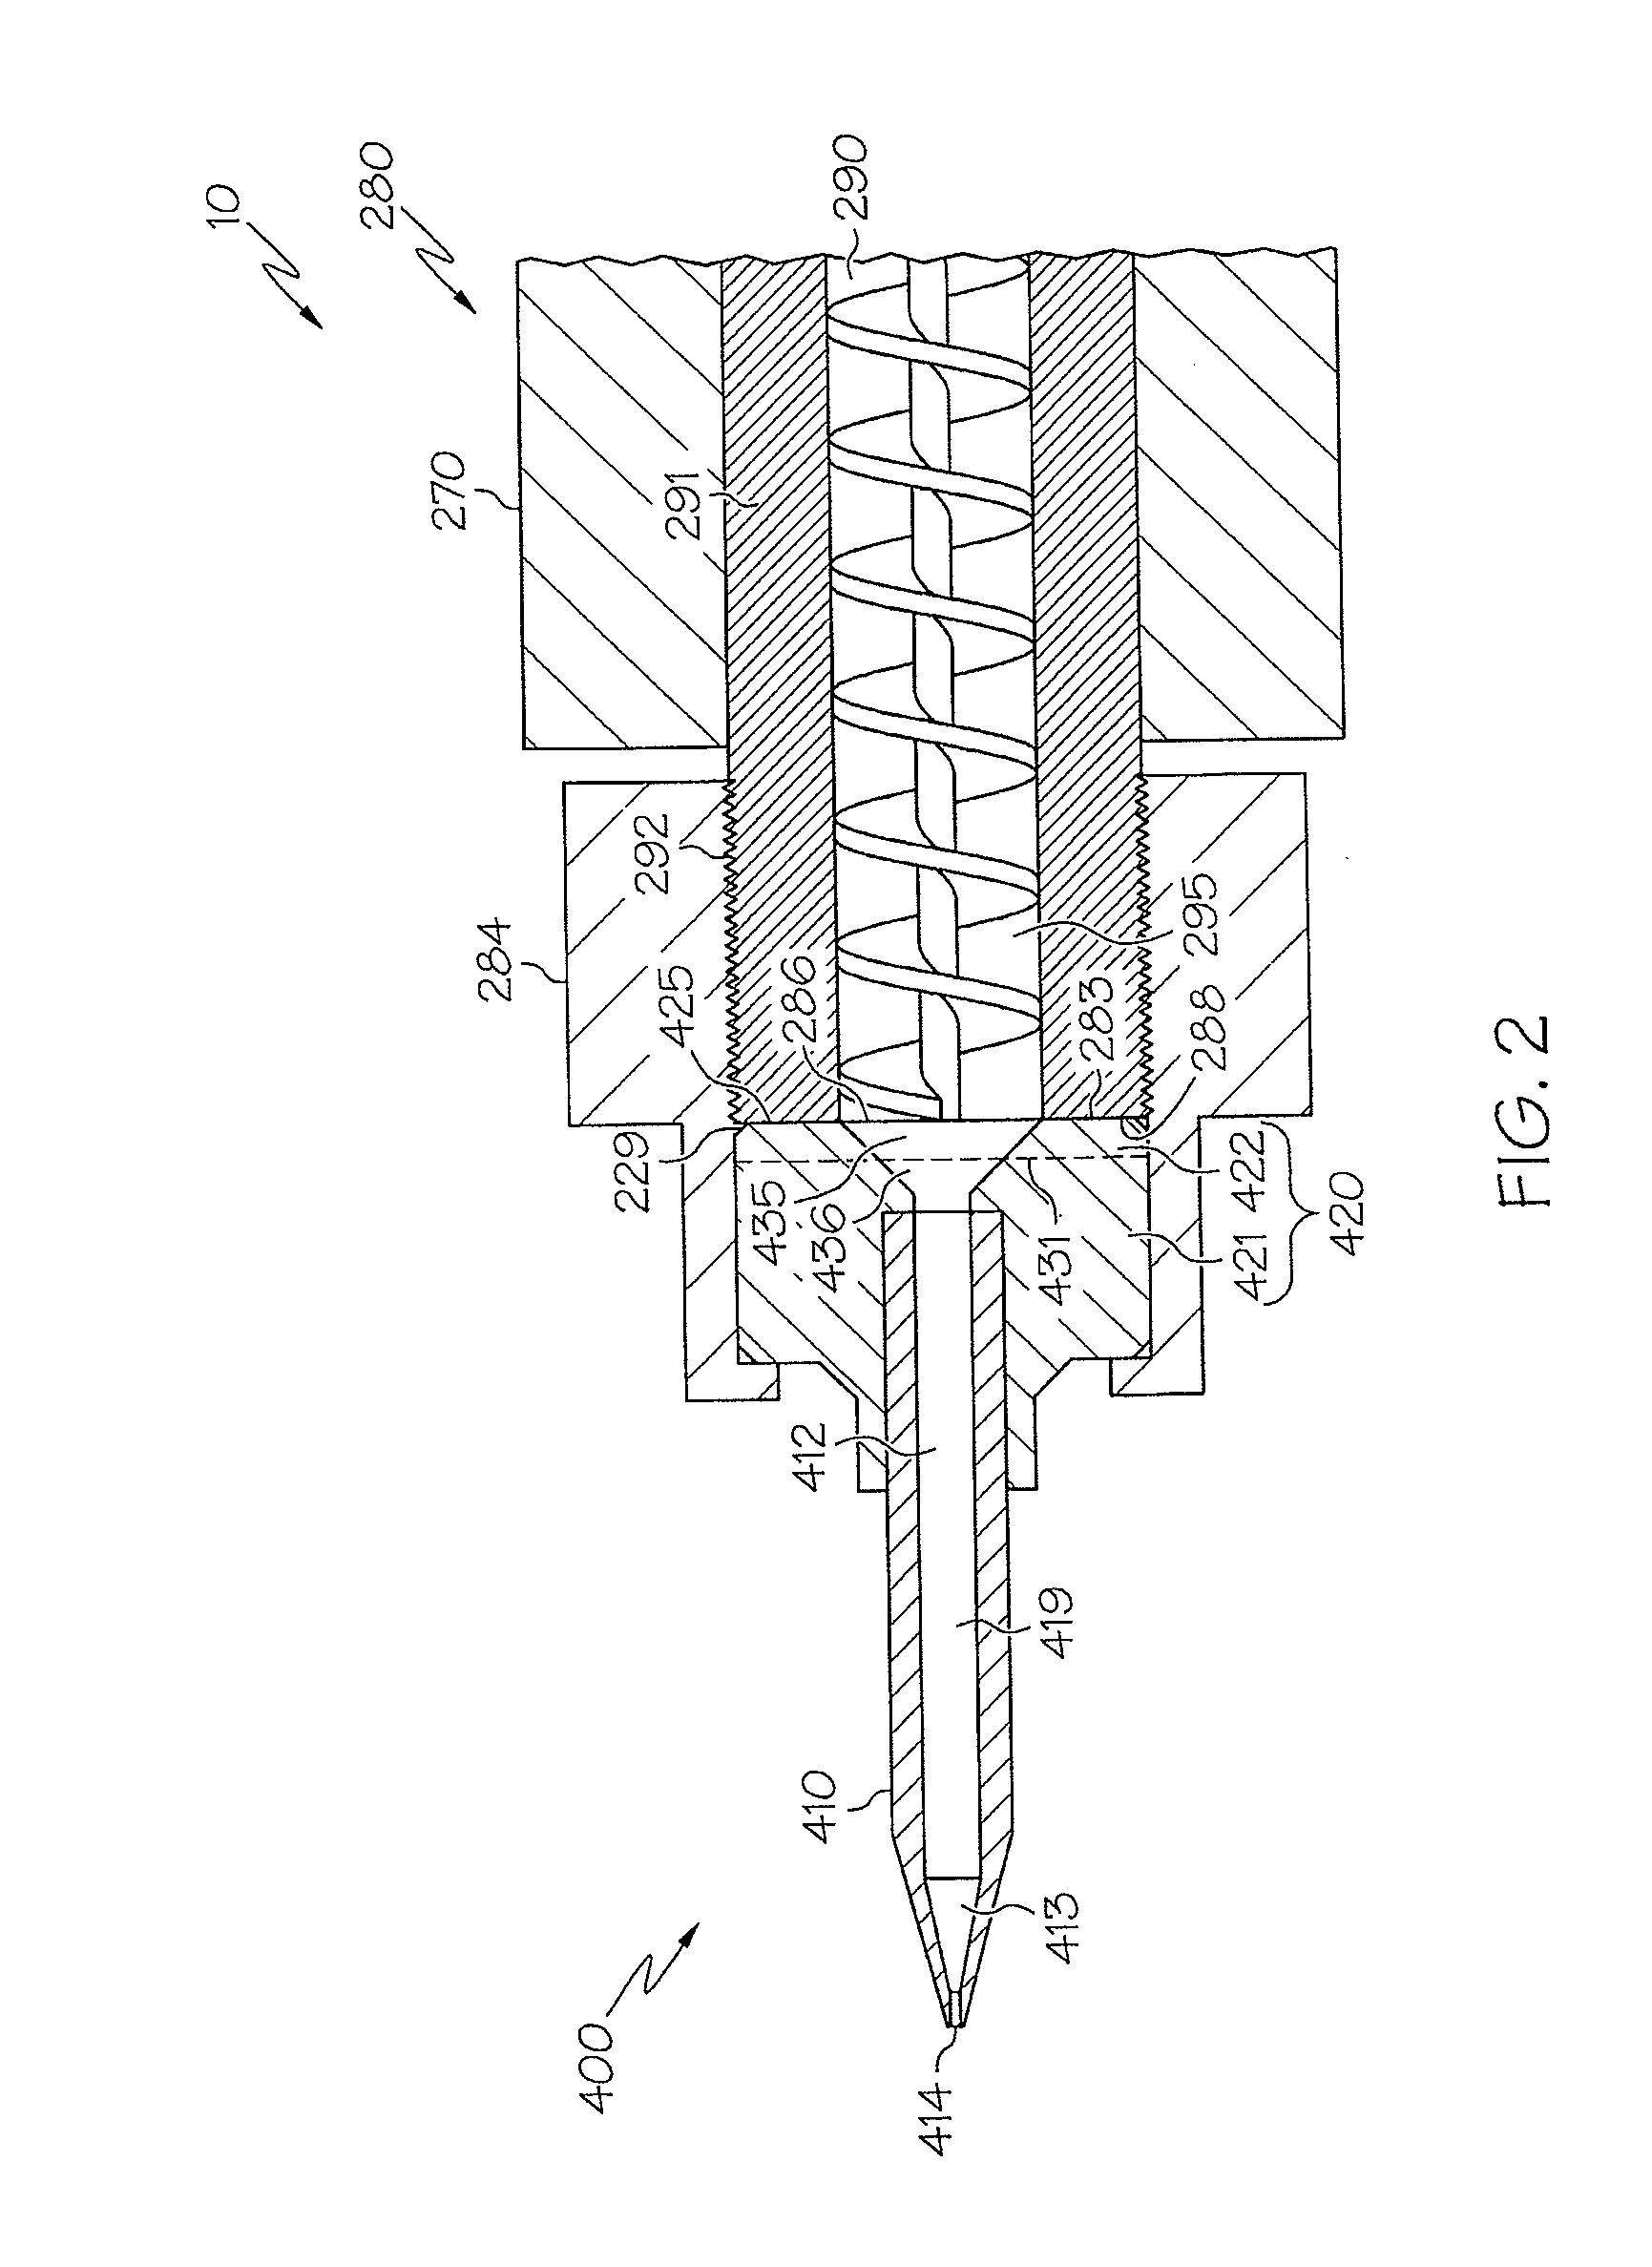 Material dispense tips and methods for forming the same